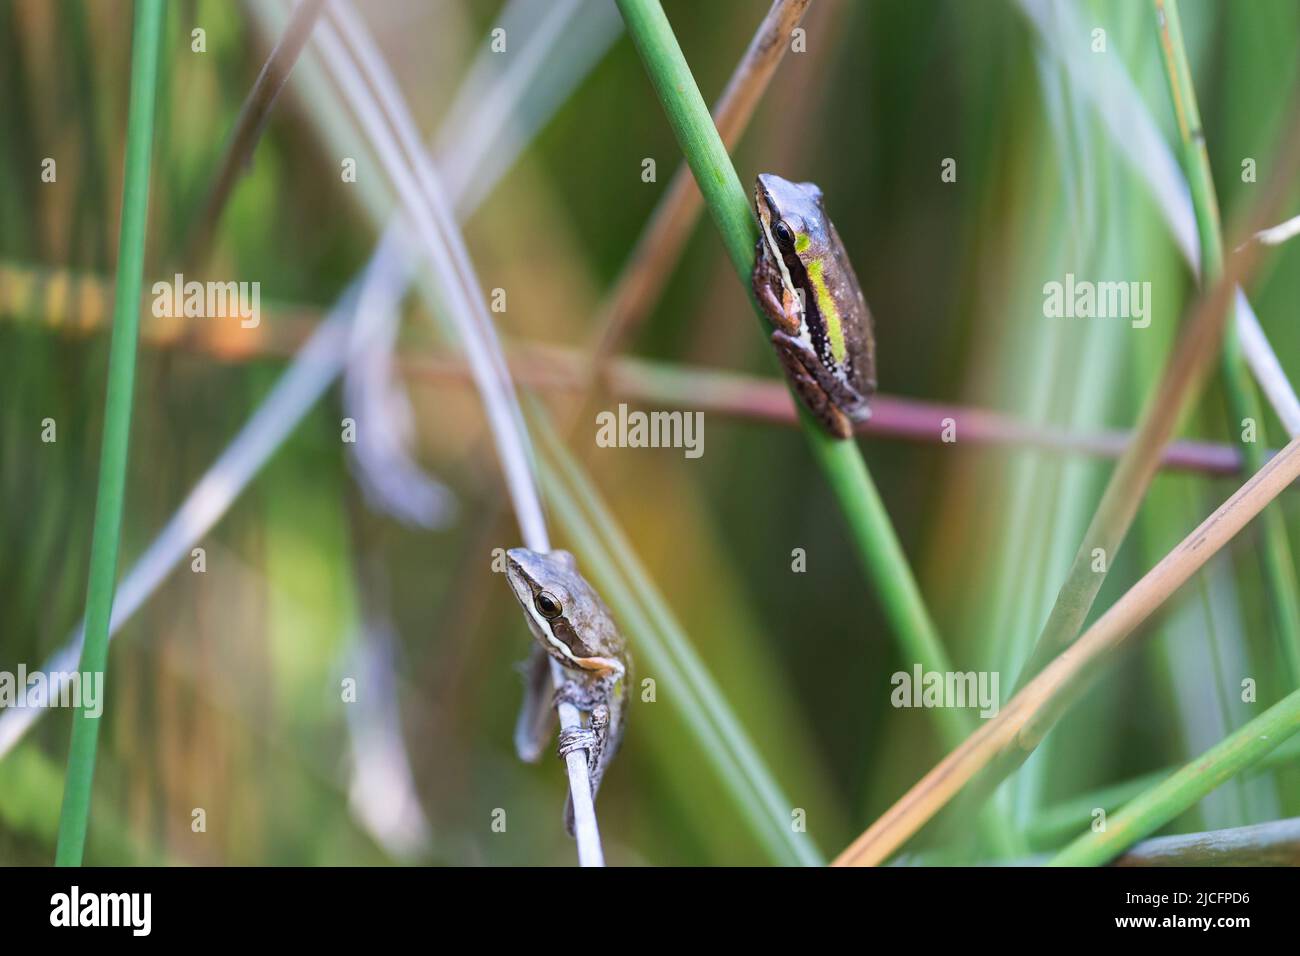 Two Slender tree frog on verticle reed, Northcliffe Western Australia Stock Photo